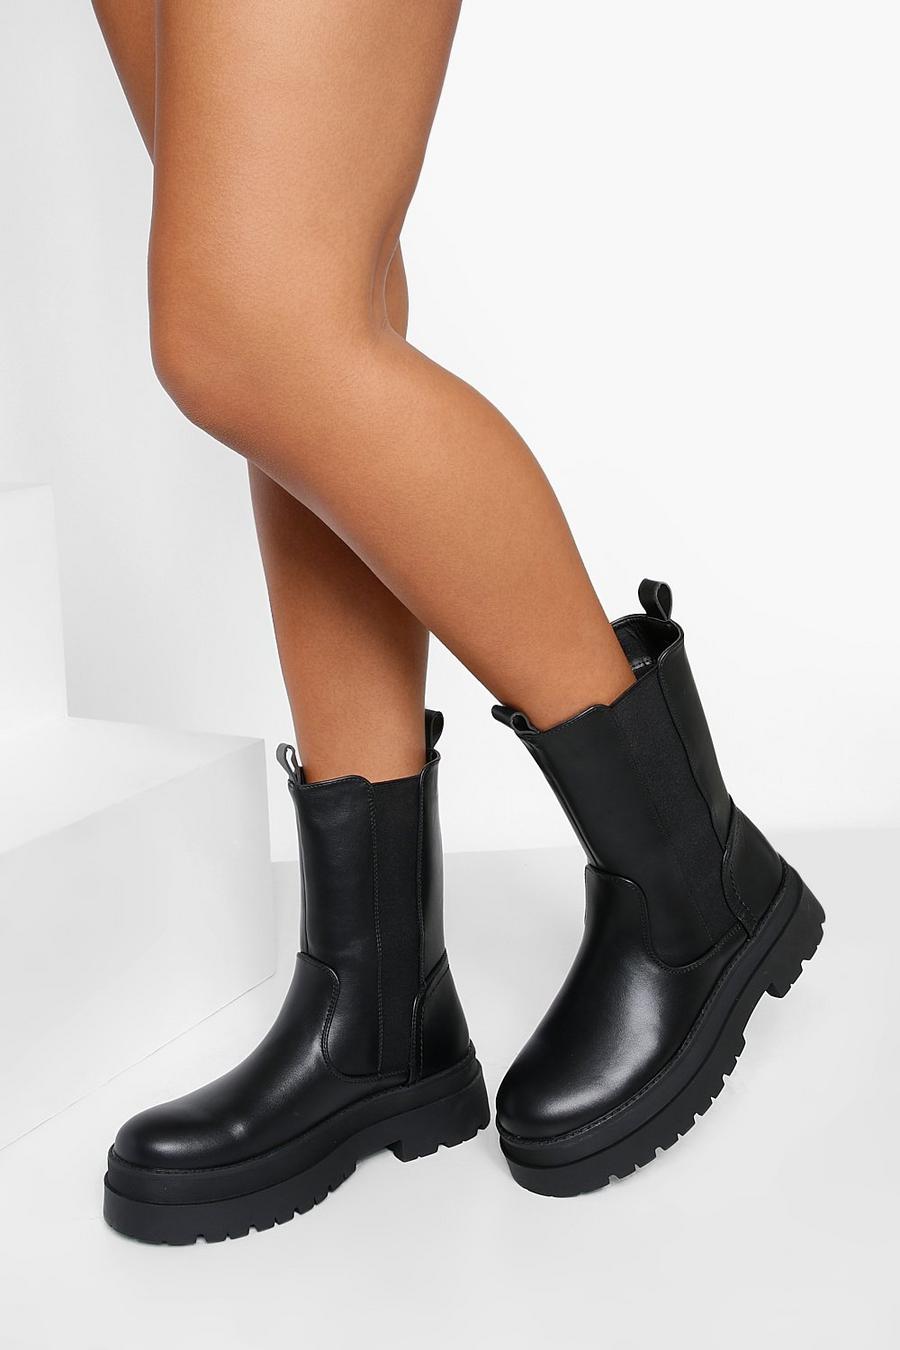 Black Chunky High Ankle Chelsea Boots